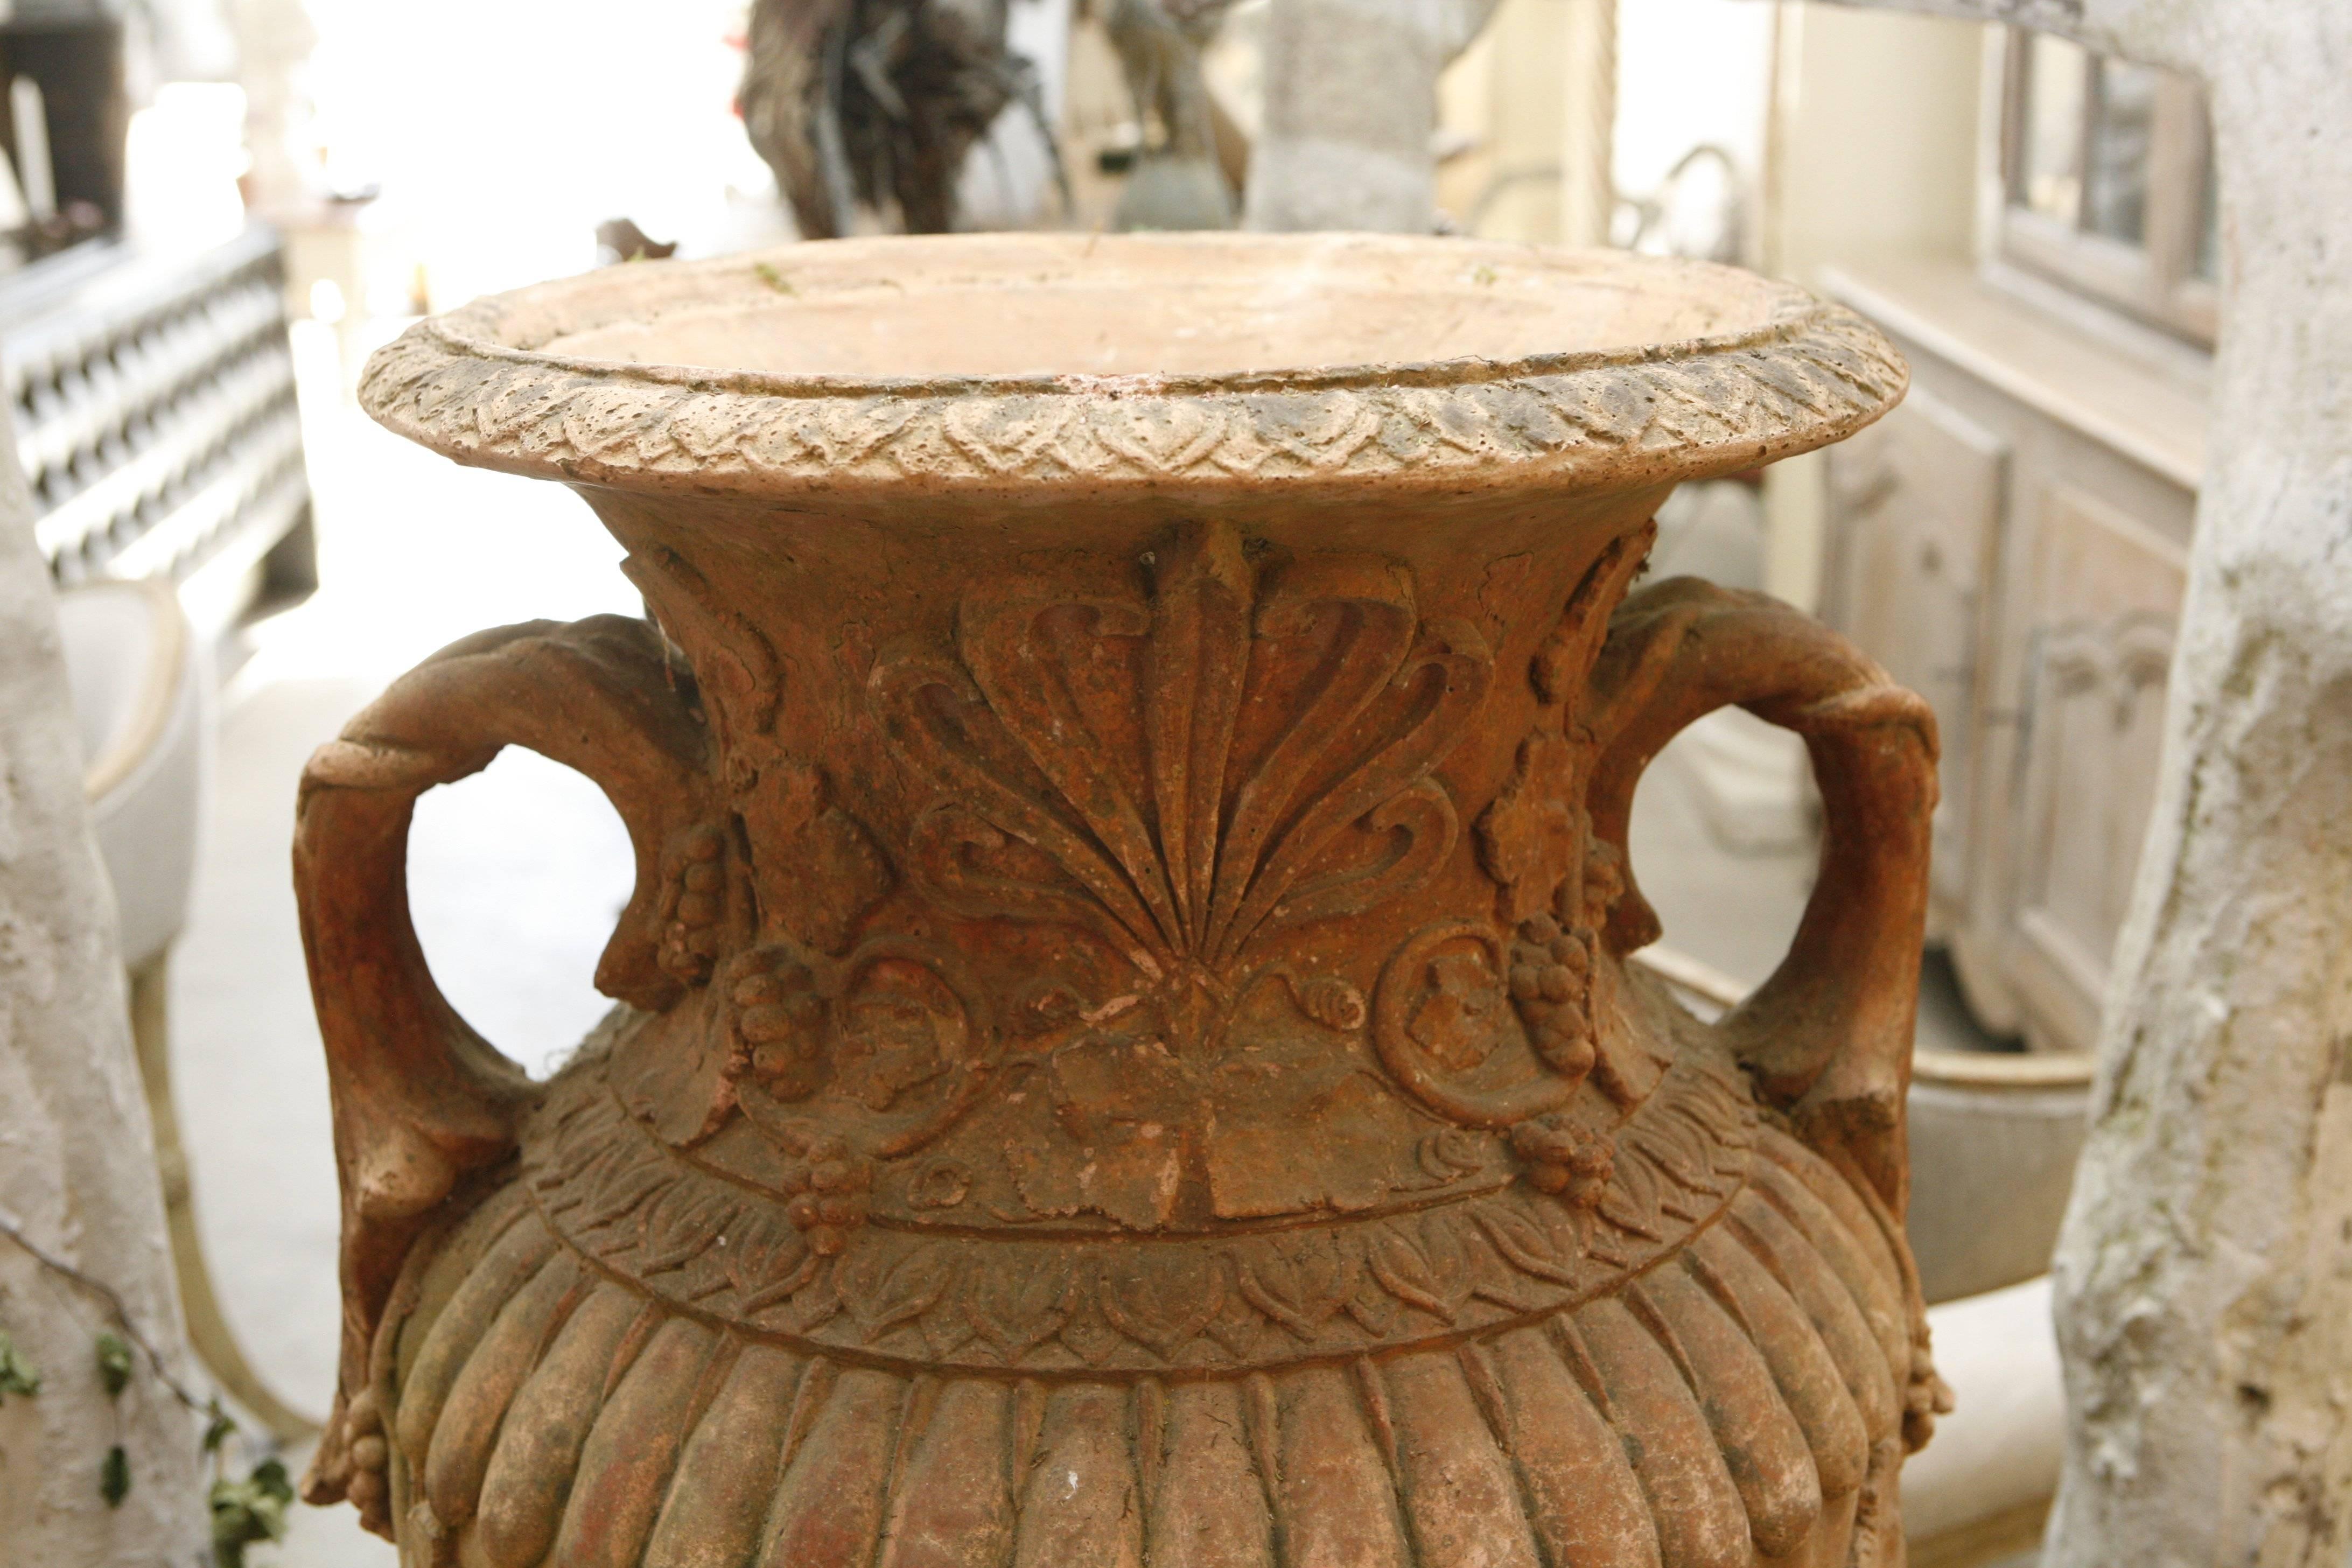 A single large red terra cotta urn with floral decoration sitting on a pedestal. Exposure to the elements from being outdoors has caused beautiful patina.